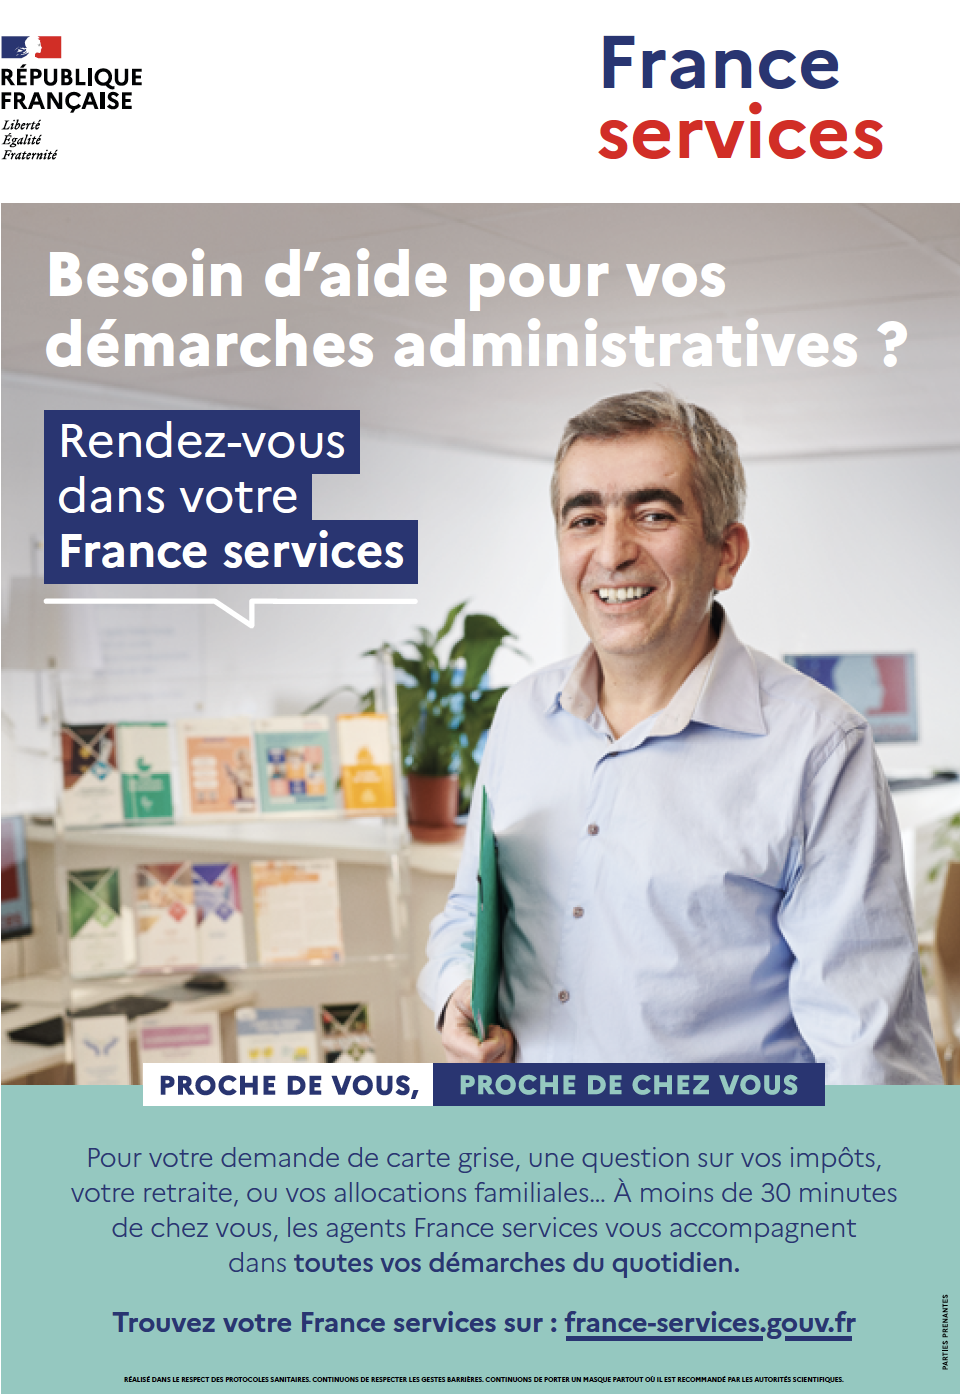 france services.png